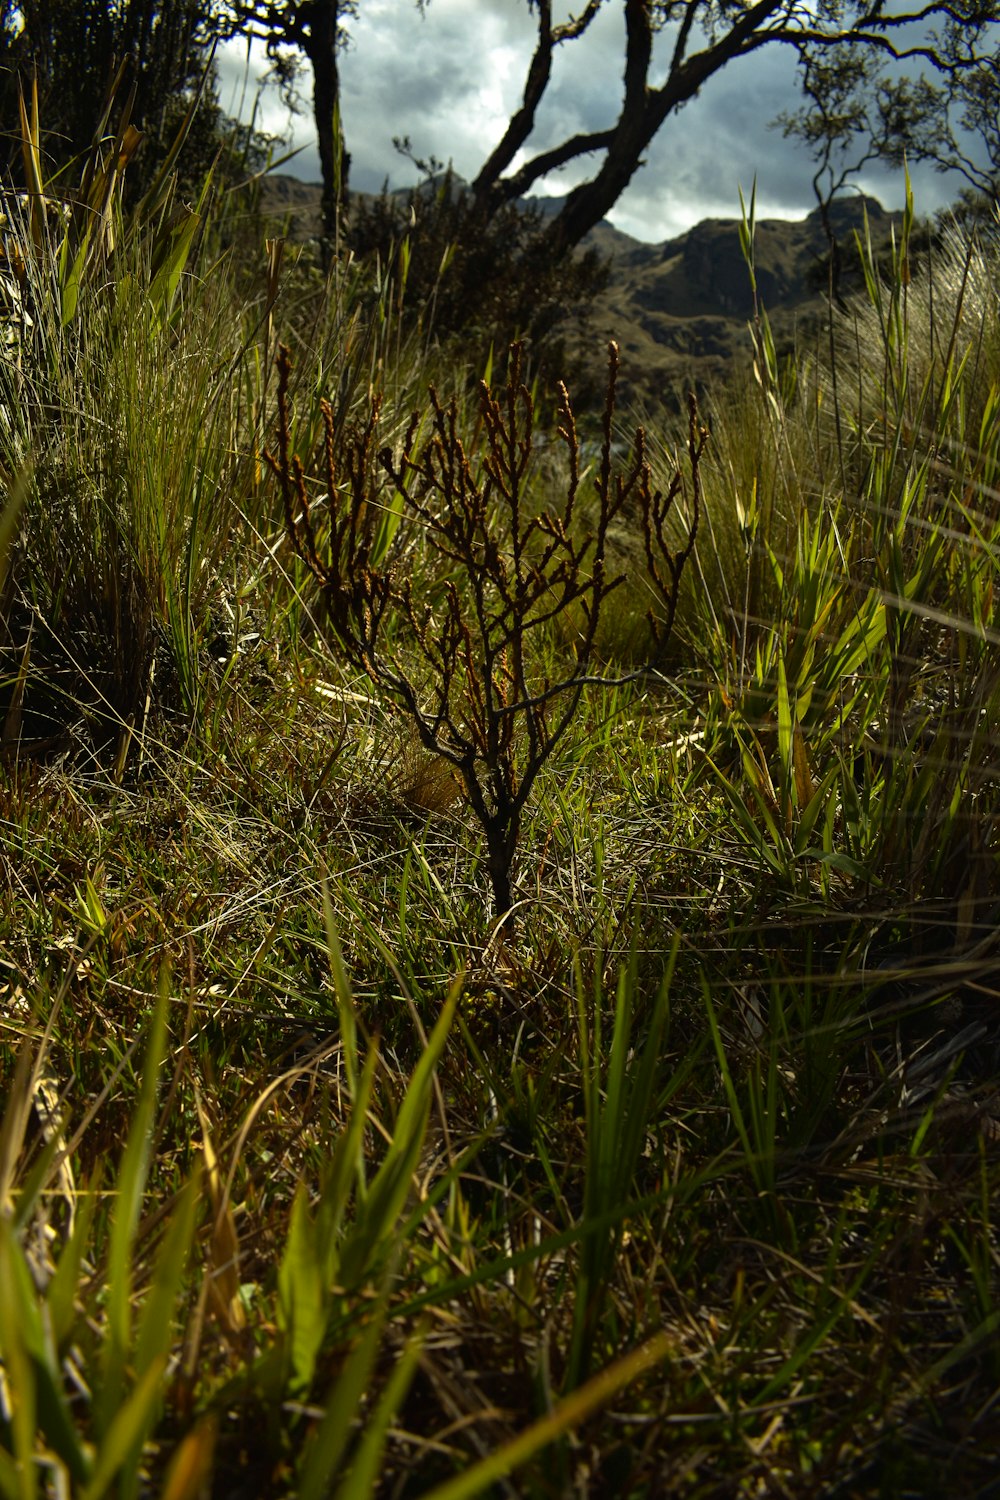 a small tree in the middle of a grassy field